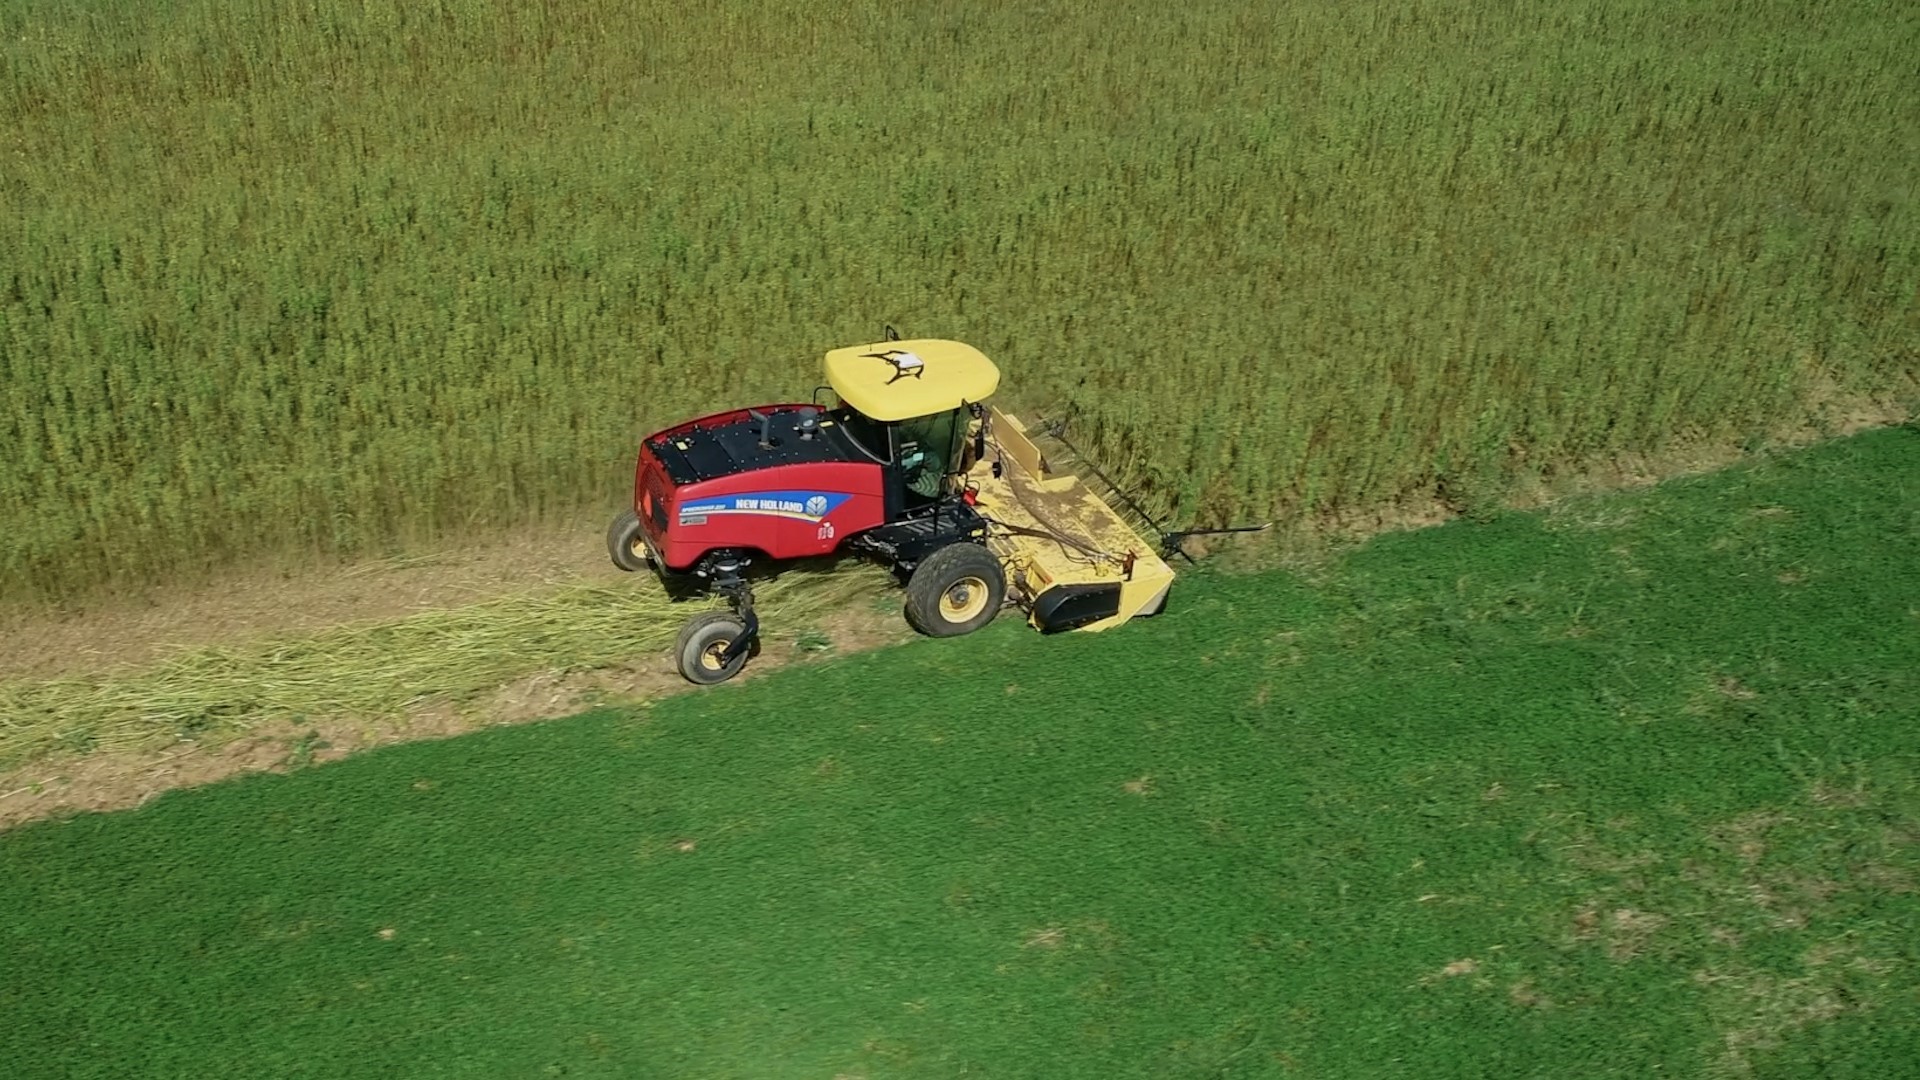 The New Holland Speedrower, a self-propelled windrower, harvesting hemp in Pennsylvania, U.S.A.